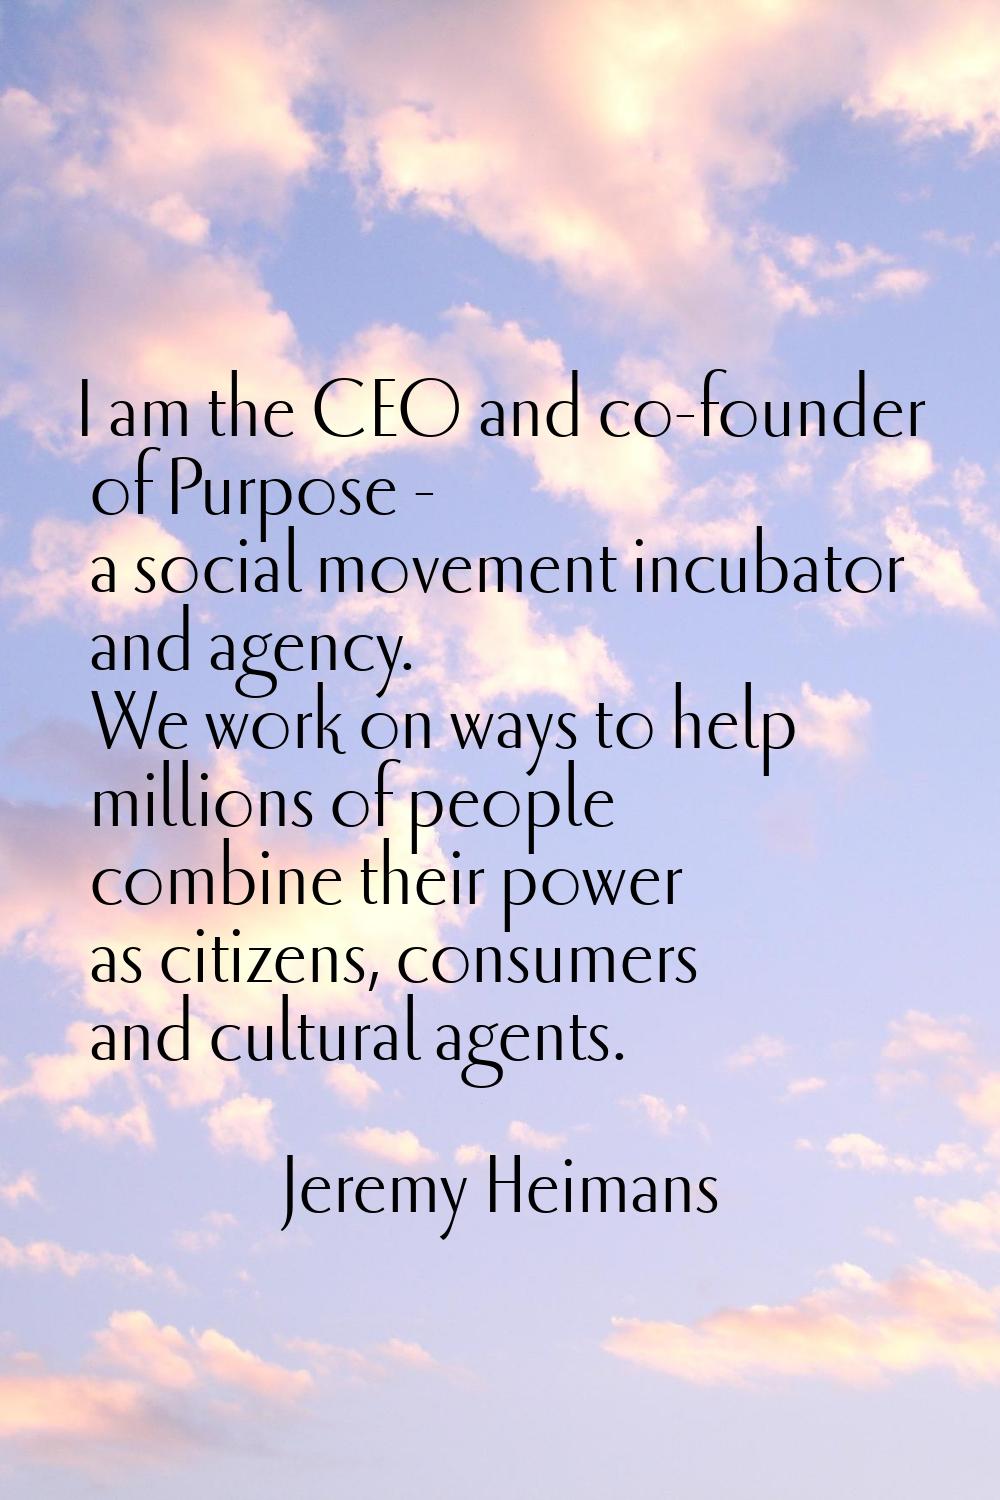 I am the CEO and co-founder of Purpose - a social movement incubator and agency. We work on ways to